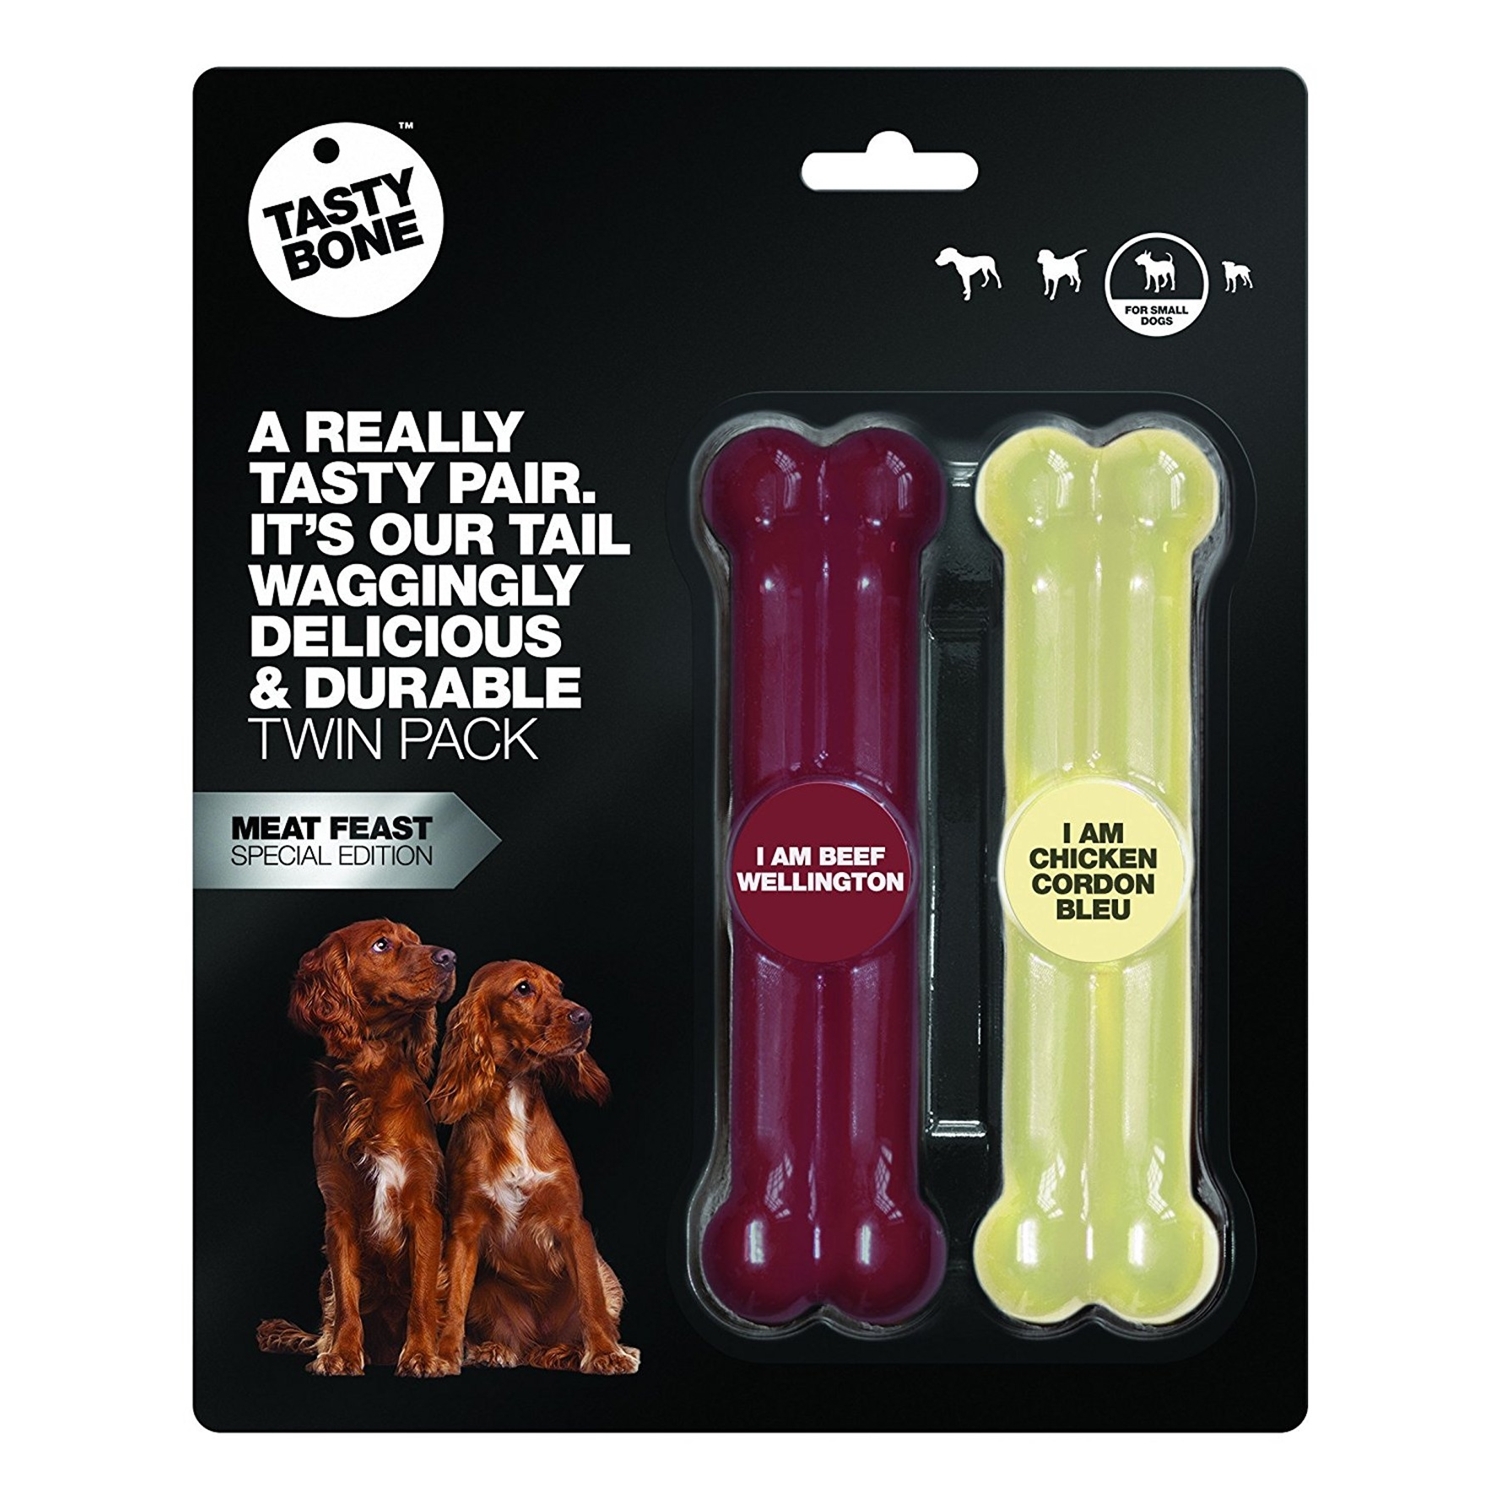 Tasty Bone Meat Feast Twin Pack for Small Dogs Image 1